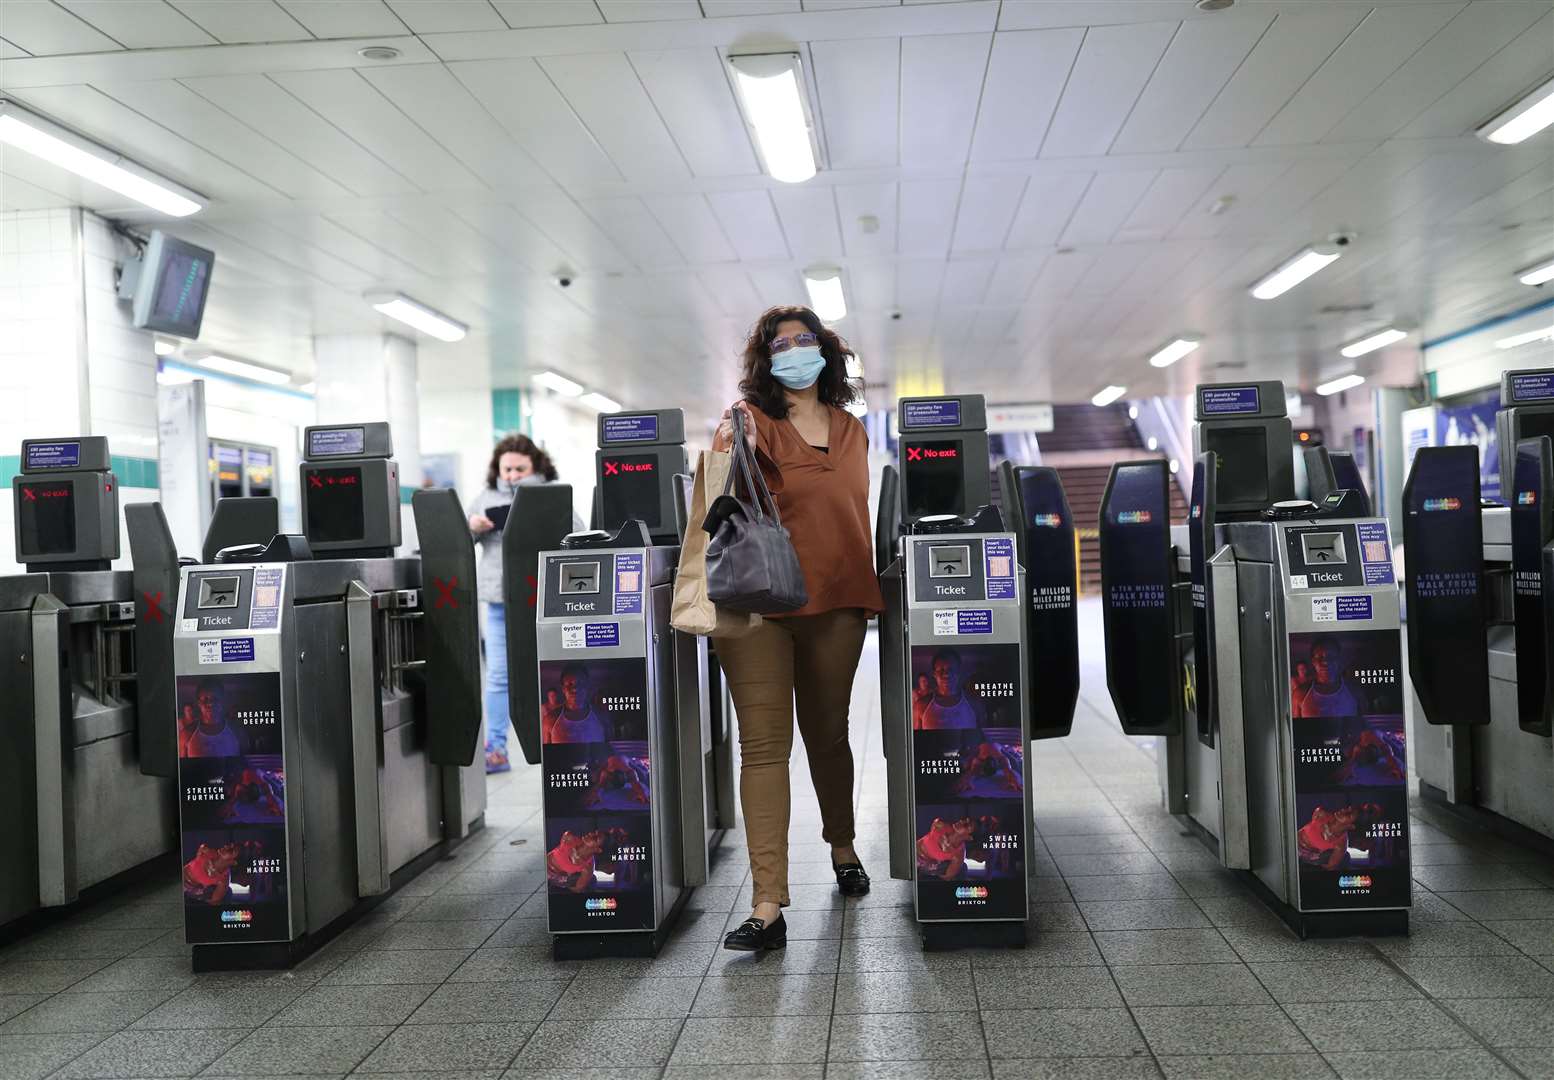 A woman wears a face mask as she exits the ticket barriers at Brixton Underground station in south London (Yui Mok/PA)